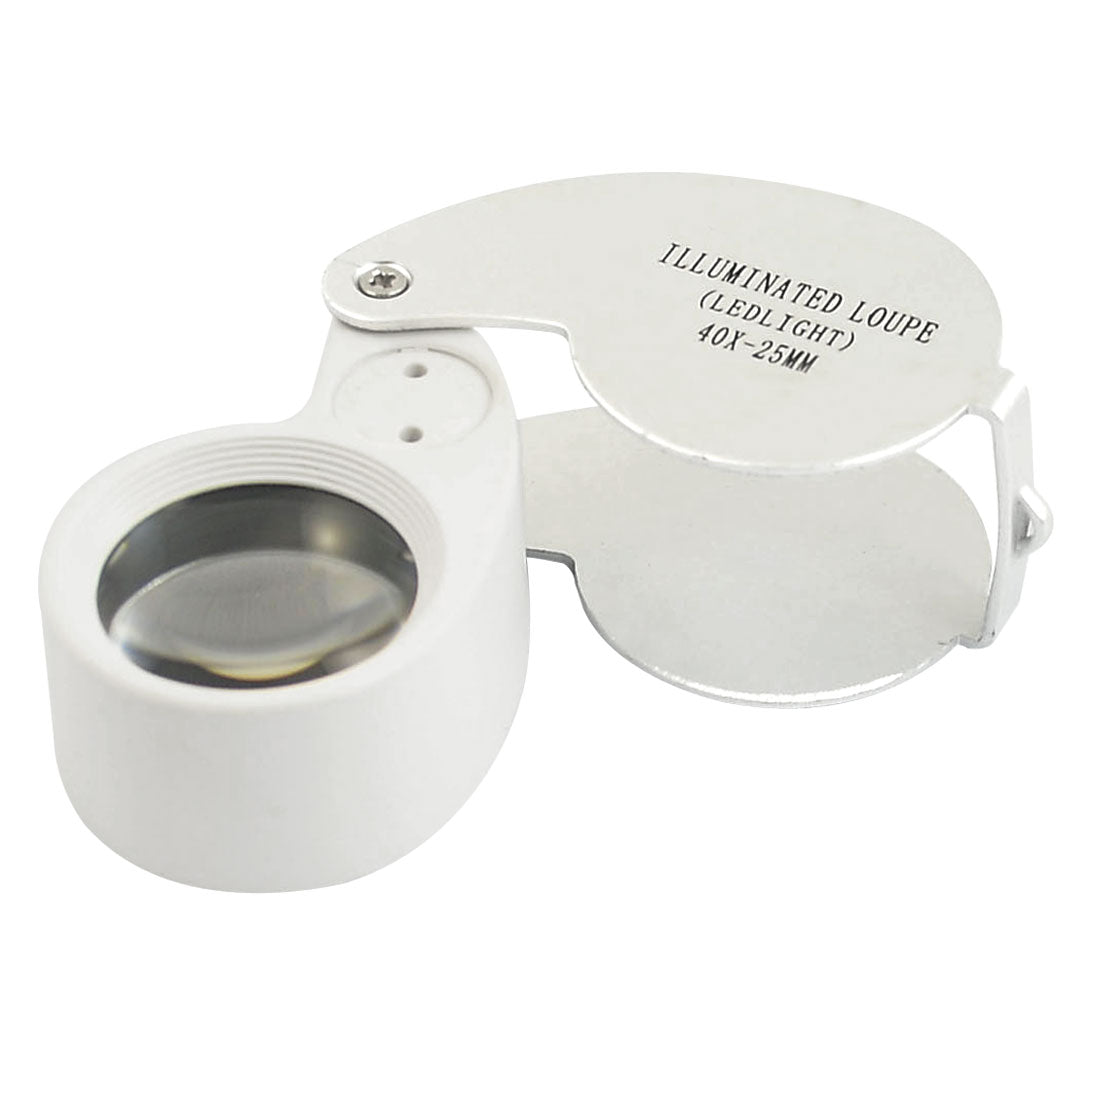 uxcell Uxcell Pocket LED Light Illuminated Magnifier Jewelry Eye 4X Magnifying Loupe